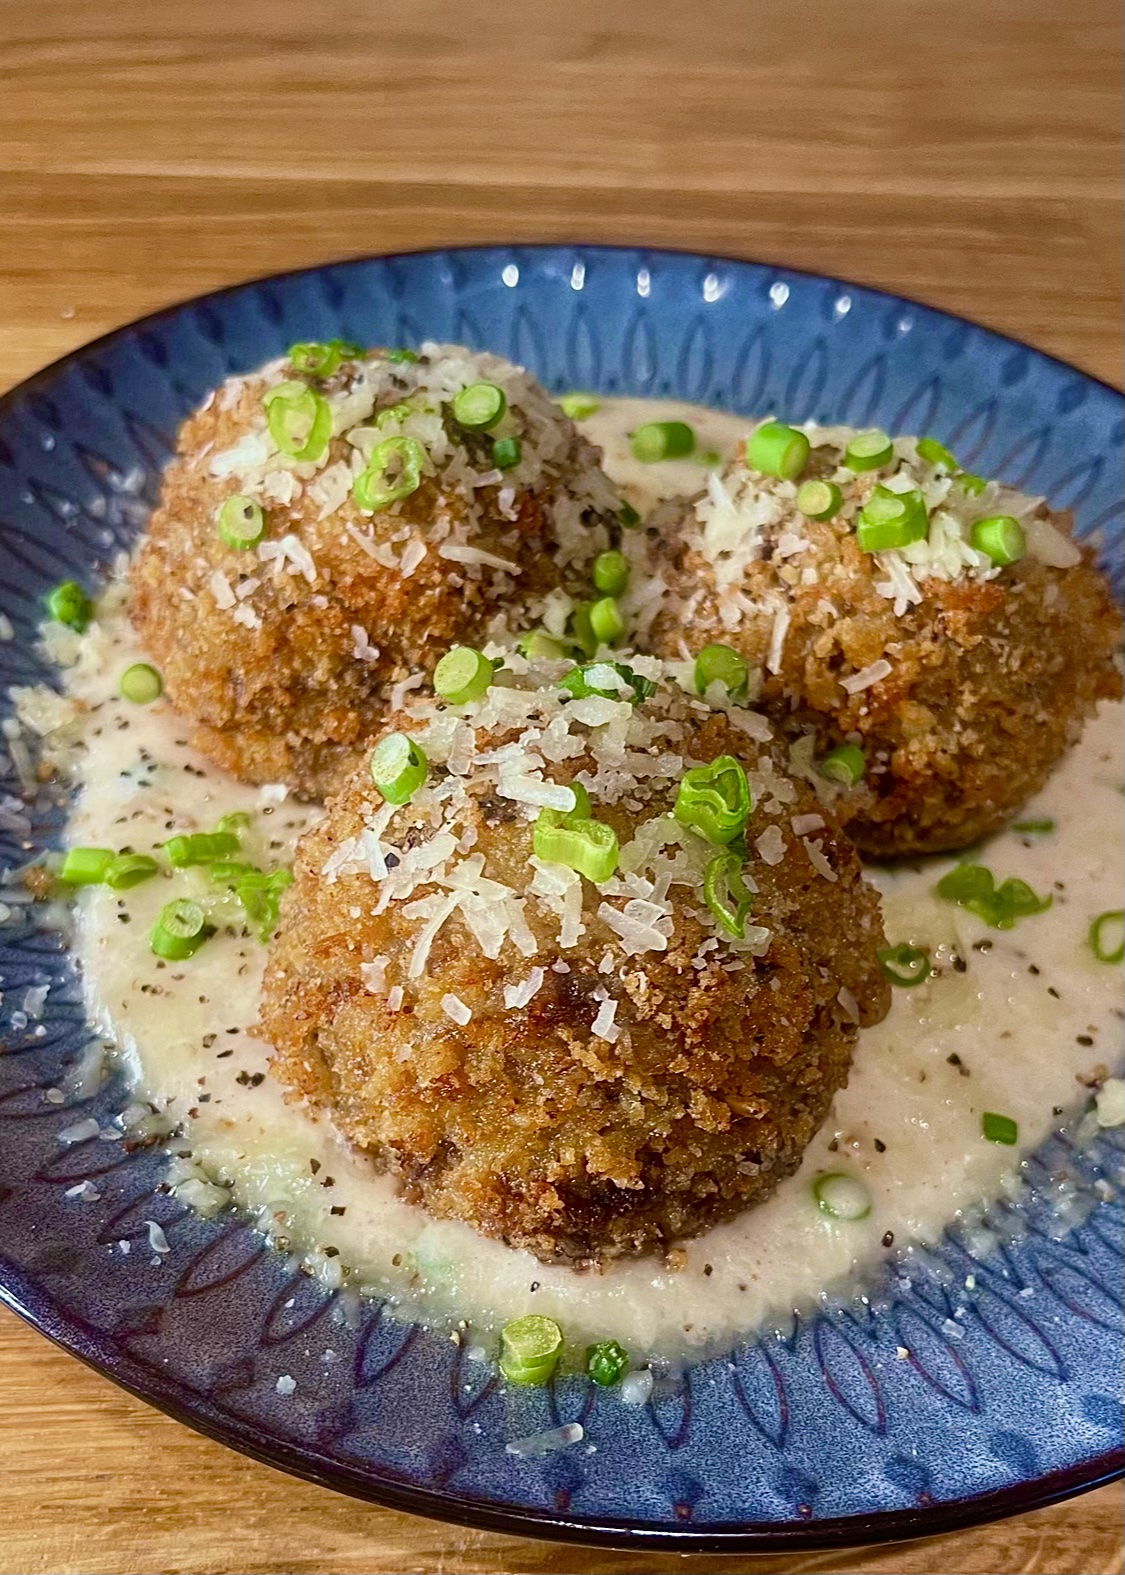 Red wine braised beef short rib croquettes with spiced bechamel topped with garlic scapes